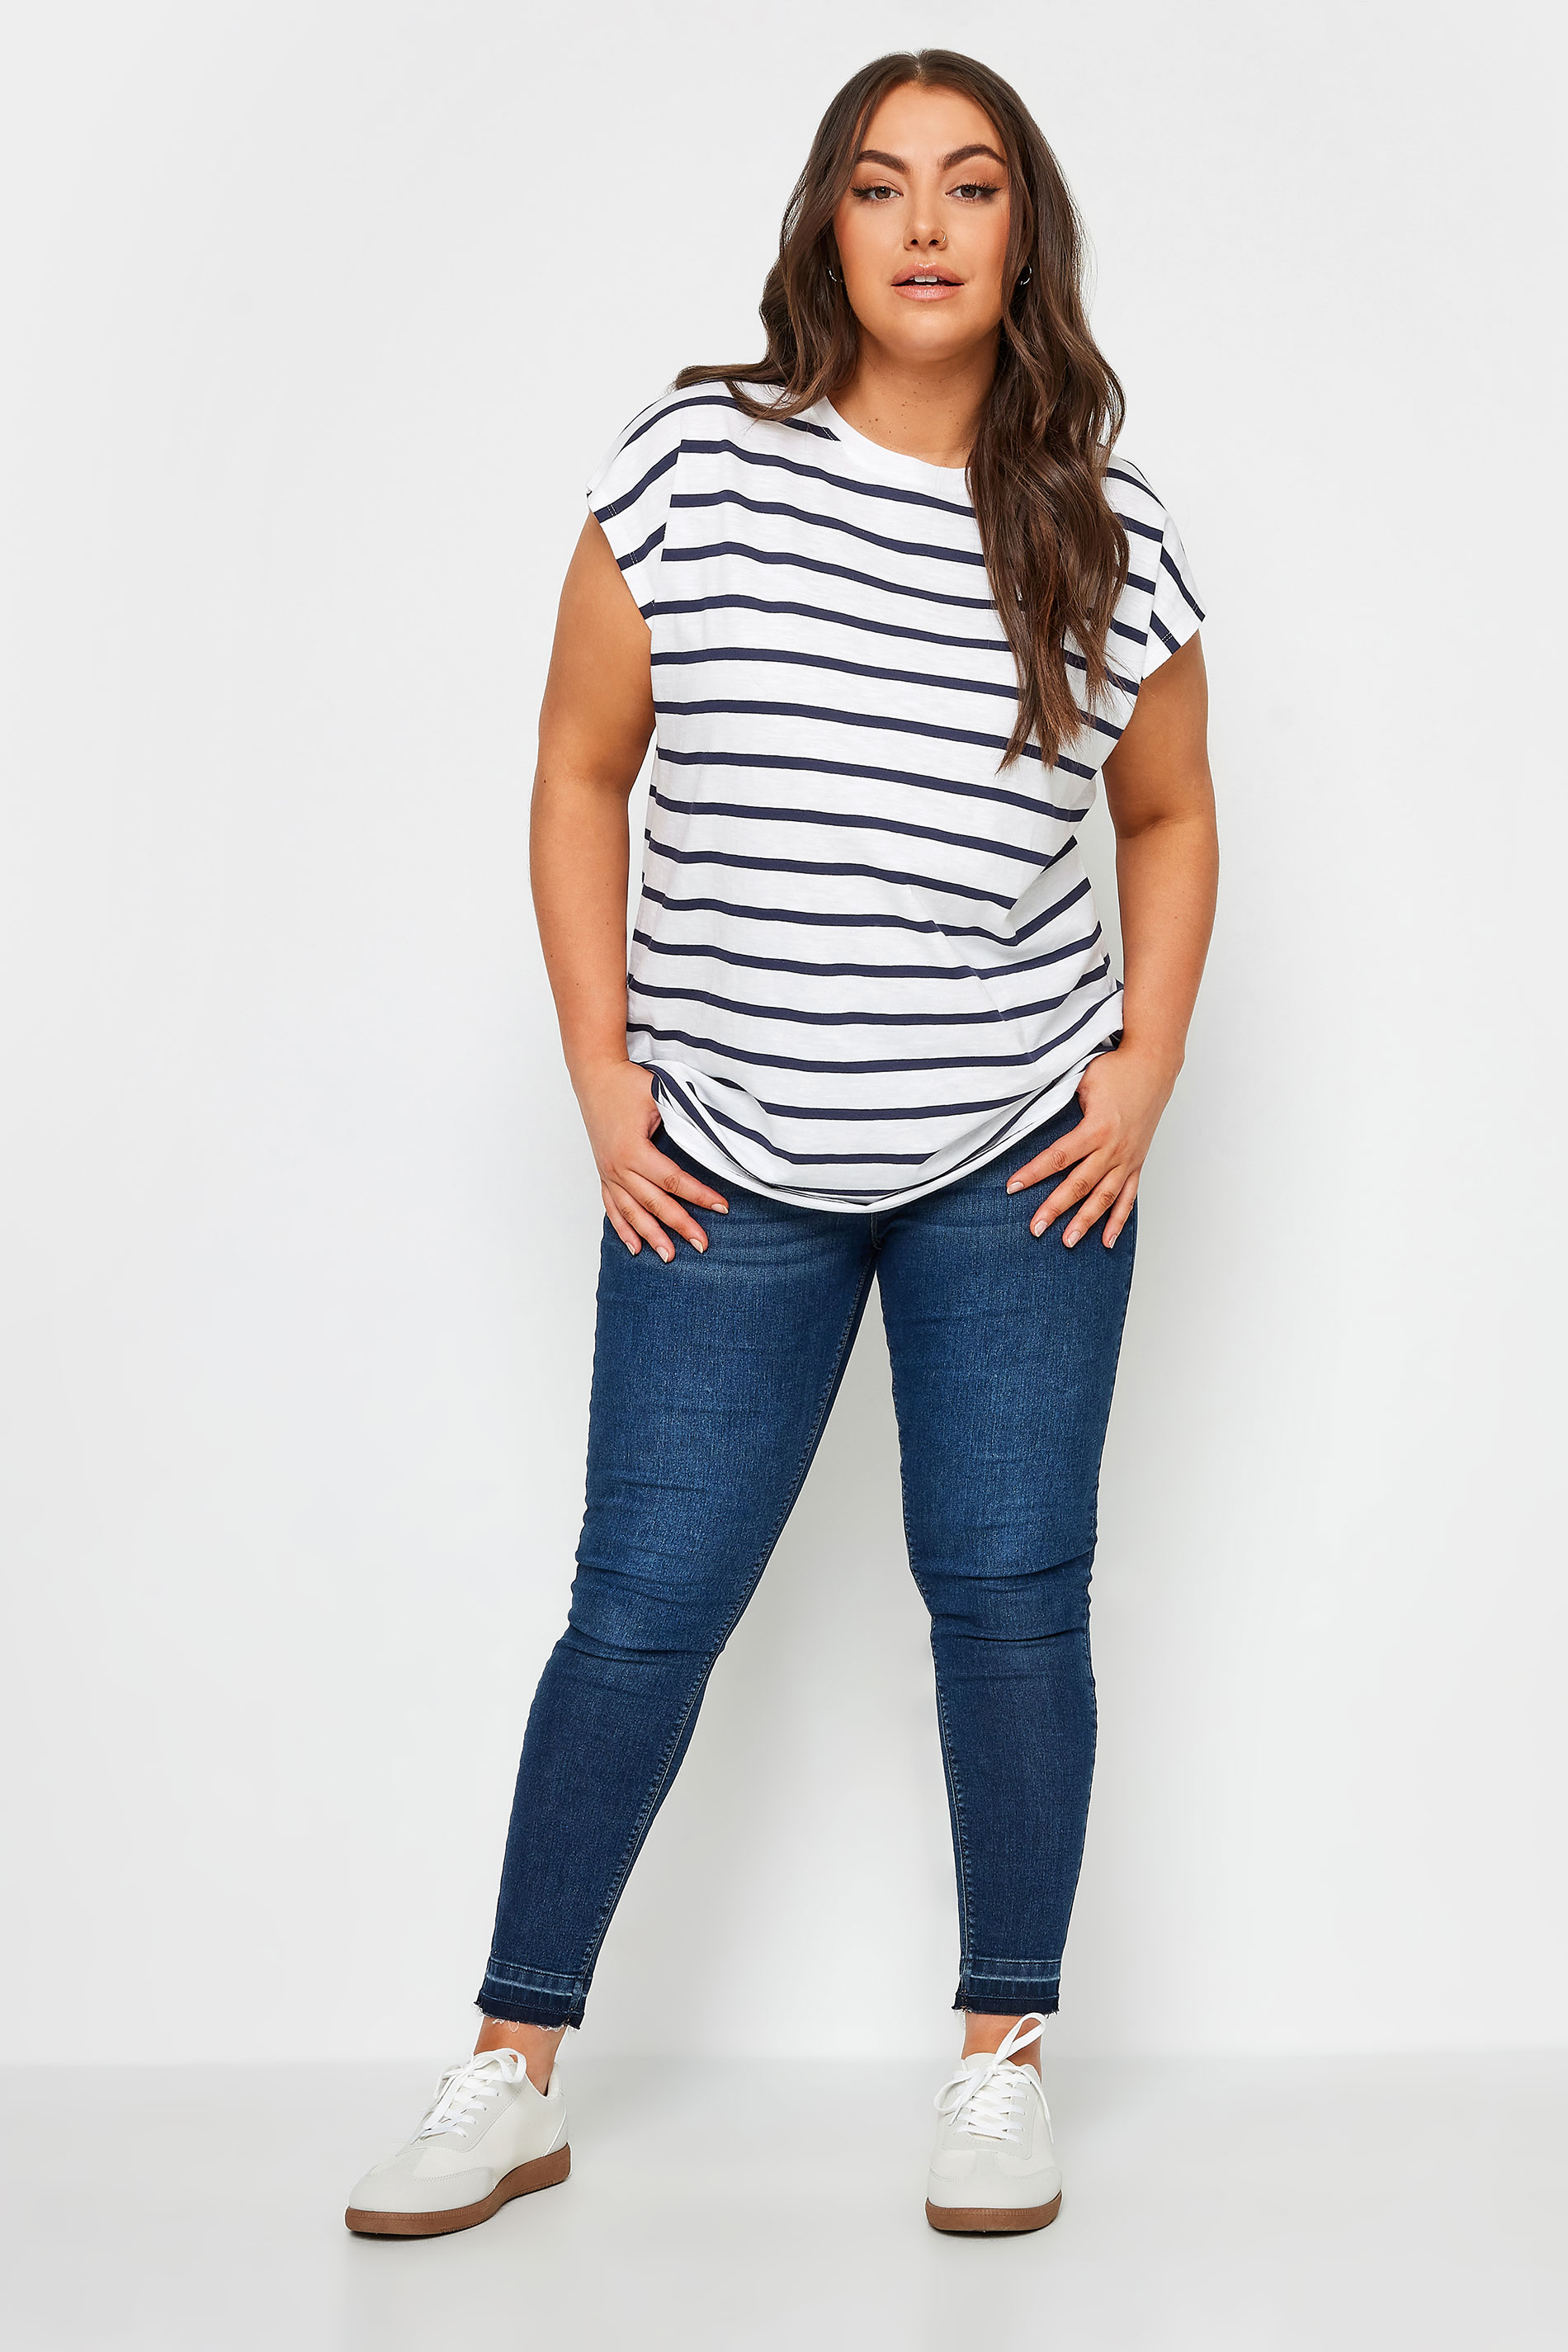 YOURS Plus Size White & Navy Blue Stripe Top | Yours Clothing 2